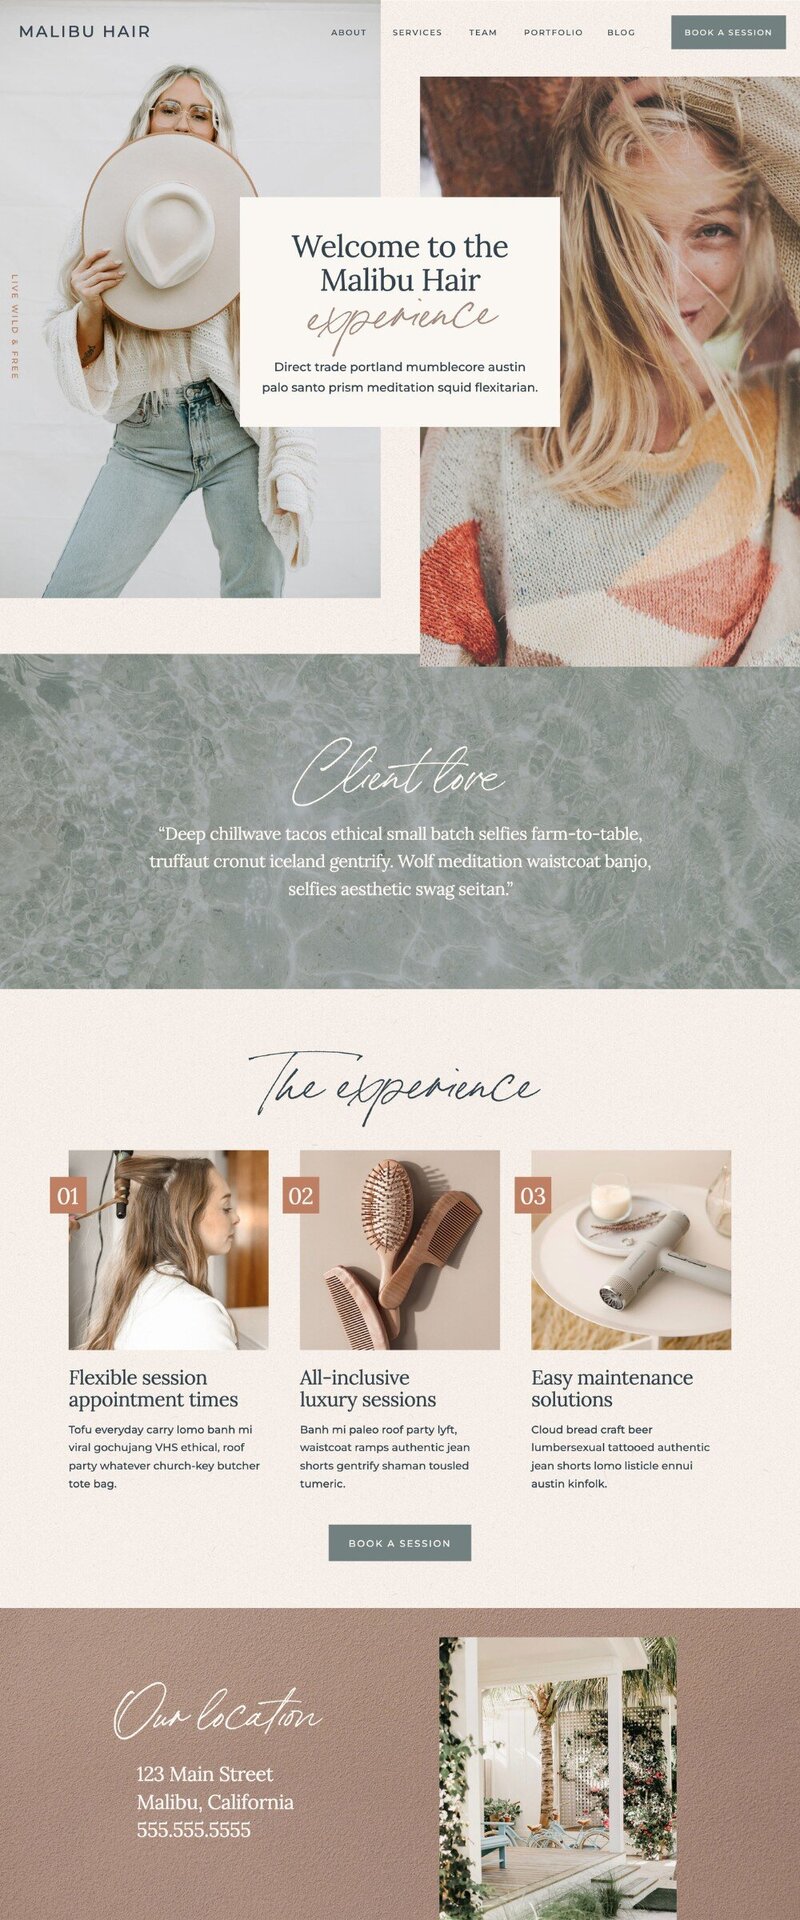 ShowIt Website Template for Hair Stylists and Salons - Malibu - About Page